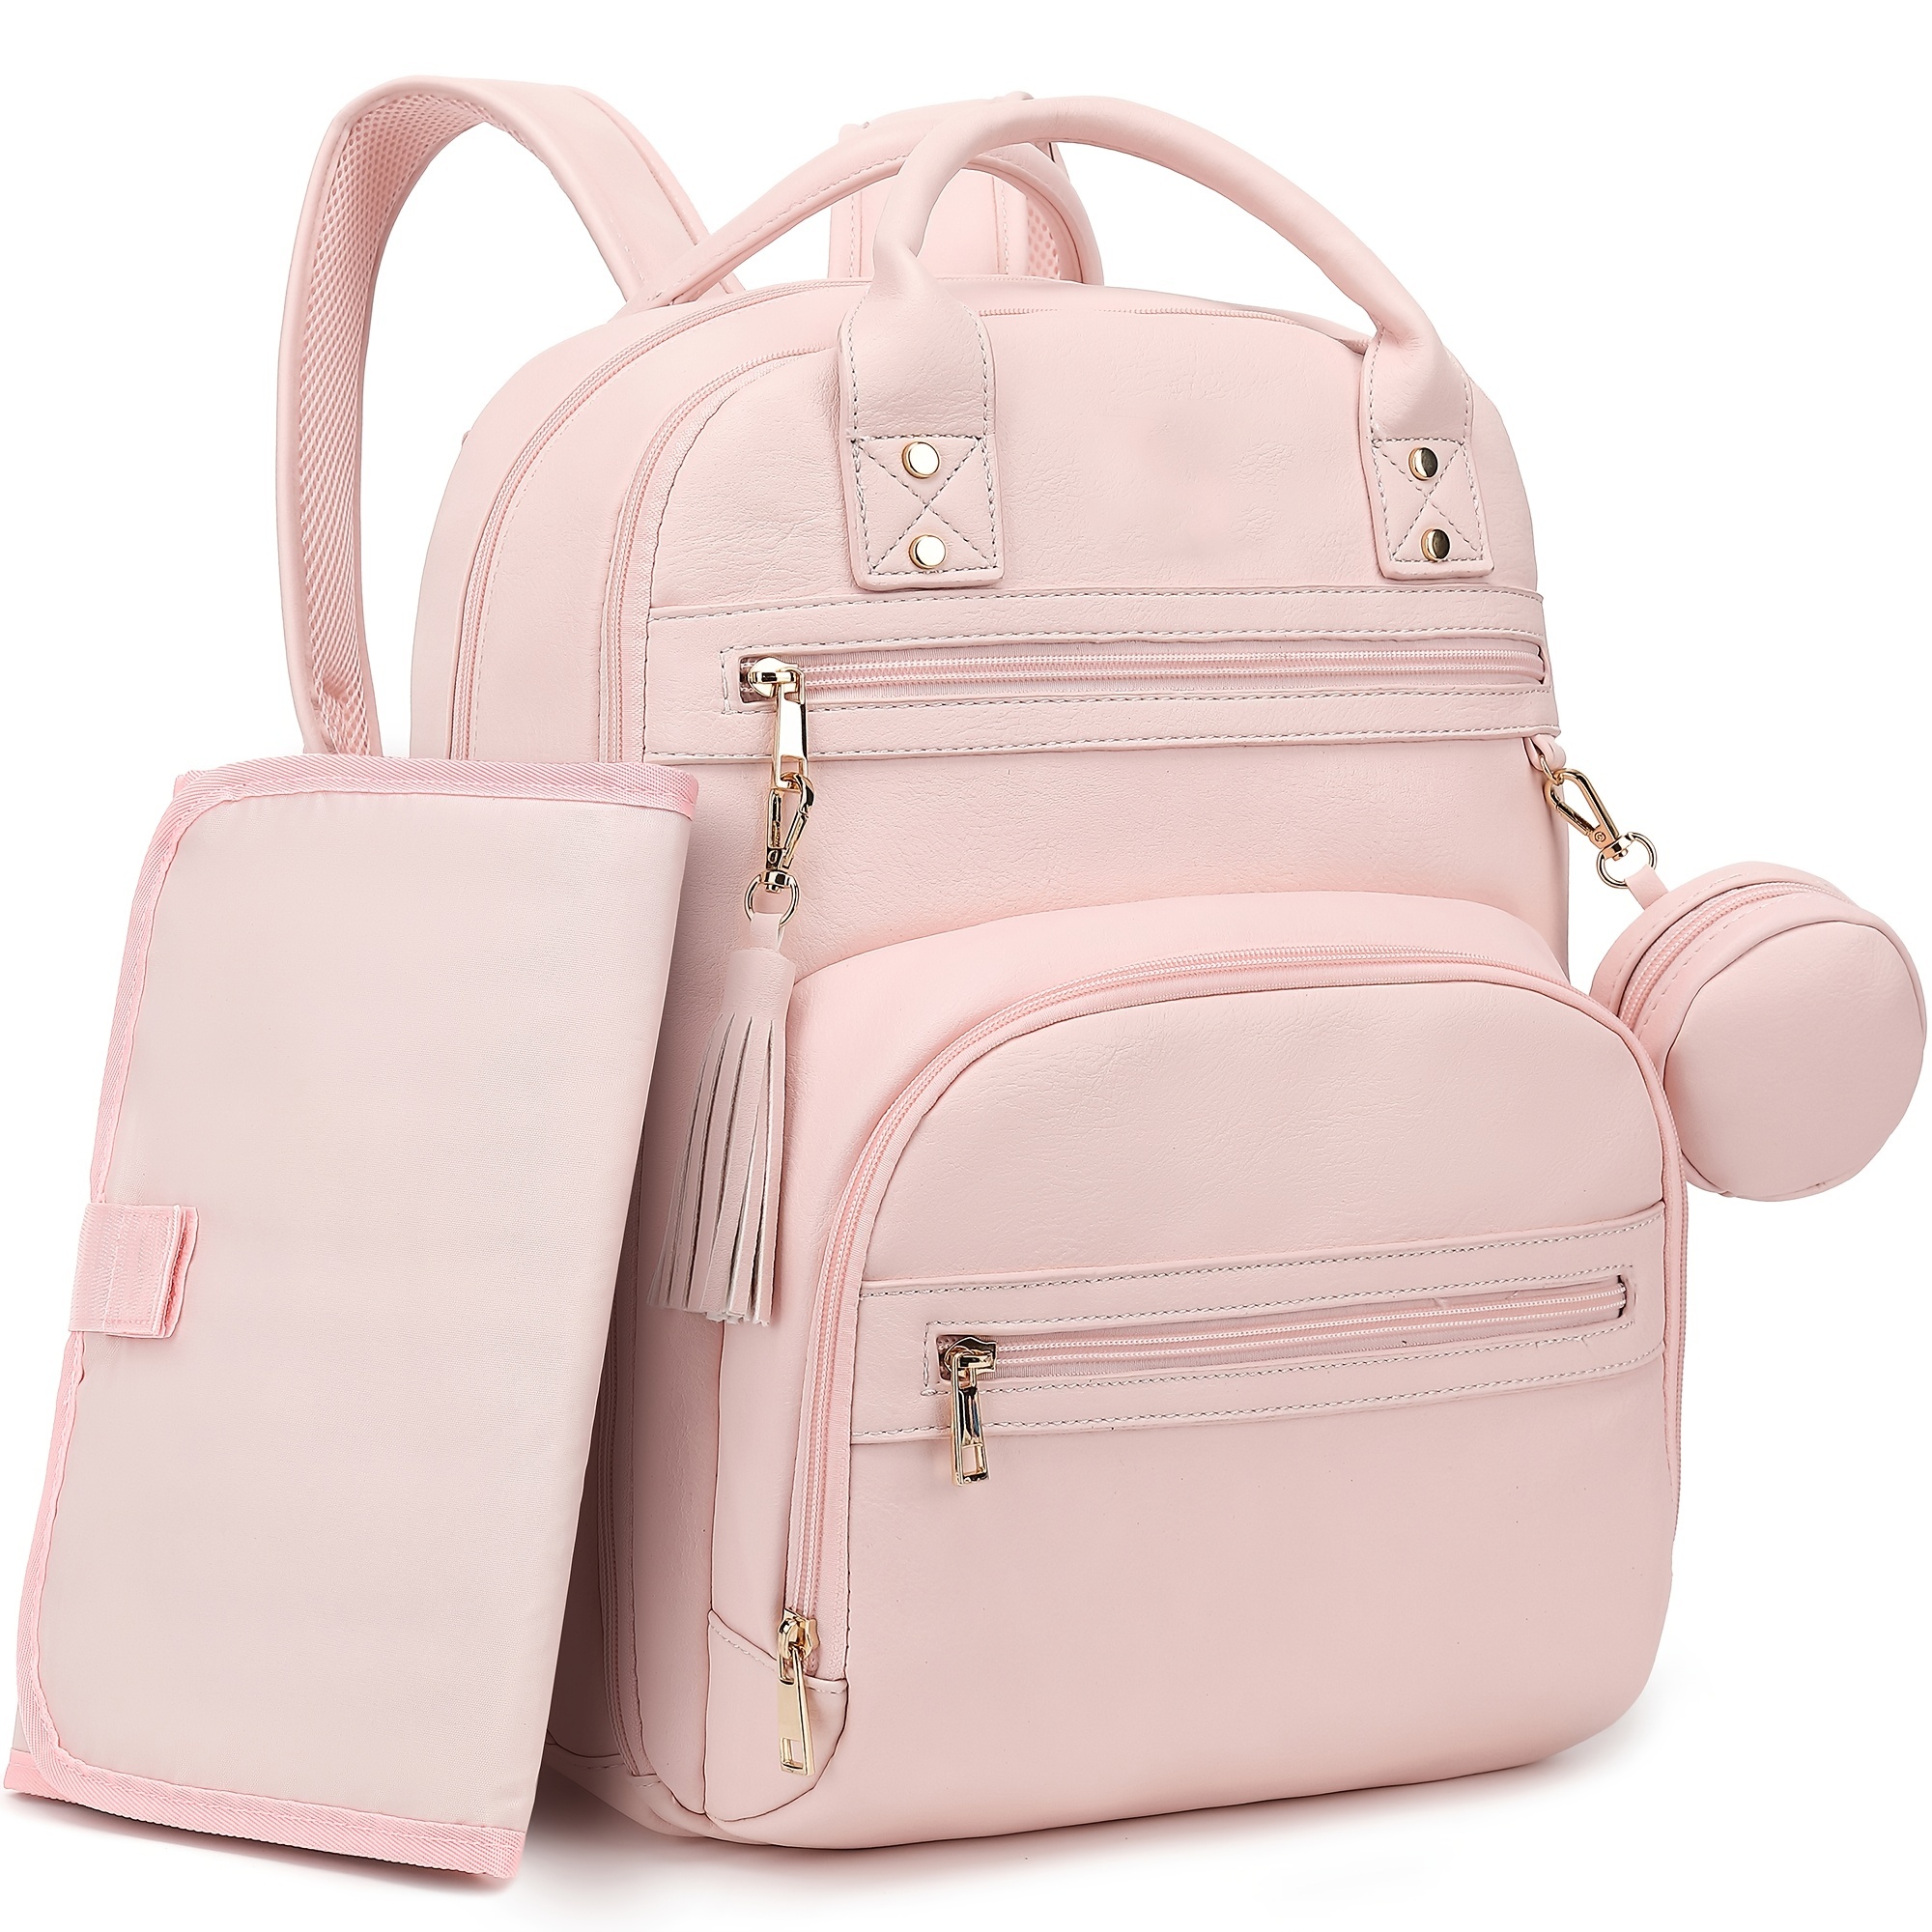 Baby Diaper Bag Backpack with Changing Pad, Pacifier Case - Pink